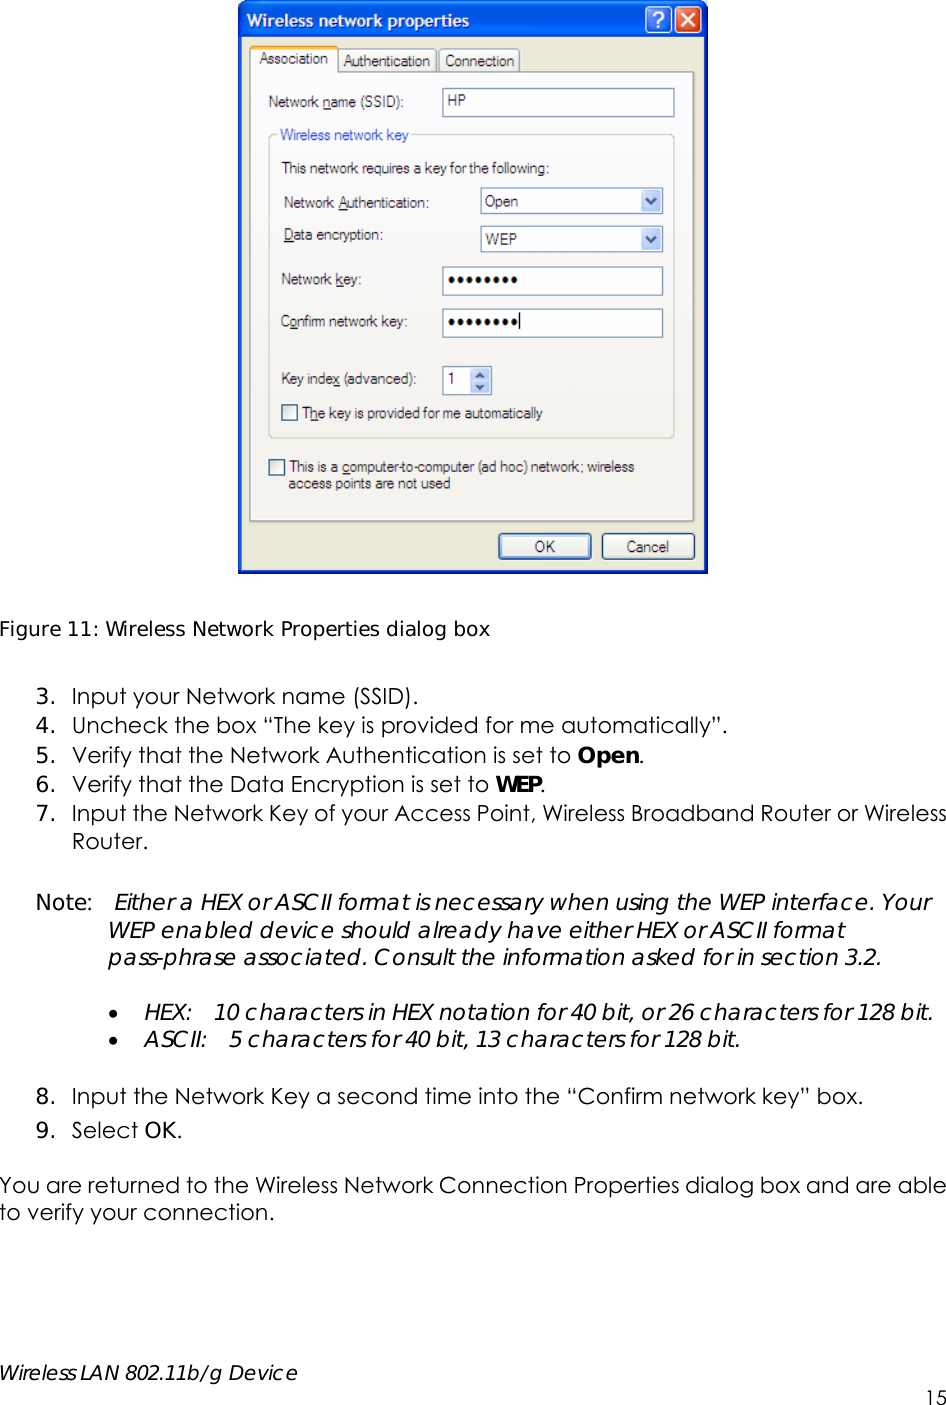     Wireless LAN 802.11b/g Device        15   Figure 11: Wireless Network Properties dialog box  3. Input your Network name (SSID).   4. Uncheck the box “The key is provided for me automatically”. 5. Verify that the Network Authentication is set to Open. 6. Verify that the Data Encryption is set to WEP. 7. Input the Network Key of your Access Point, Wireless Broadband Router or Wireless Router.  Note:  Either a HEX or ASCII format is necessary when using the WEP interface. Your WEP enabled device should already have either HEX or ASCII format pass-phrase associated. Consult the information asked for in section 3.2.   HEX:    10 characters in HEX notation for 40 bit, or 26 characters for 128 bit.  ASCII:    5 characters for 40 bit, 13 characters for 128 bit.  8. Input the Network Key a second time into the “Confirm network key” box. 9. Select OK.  You are returned to the Wireless Network Connection Properties dialog box and are able to verify your connection.       